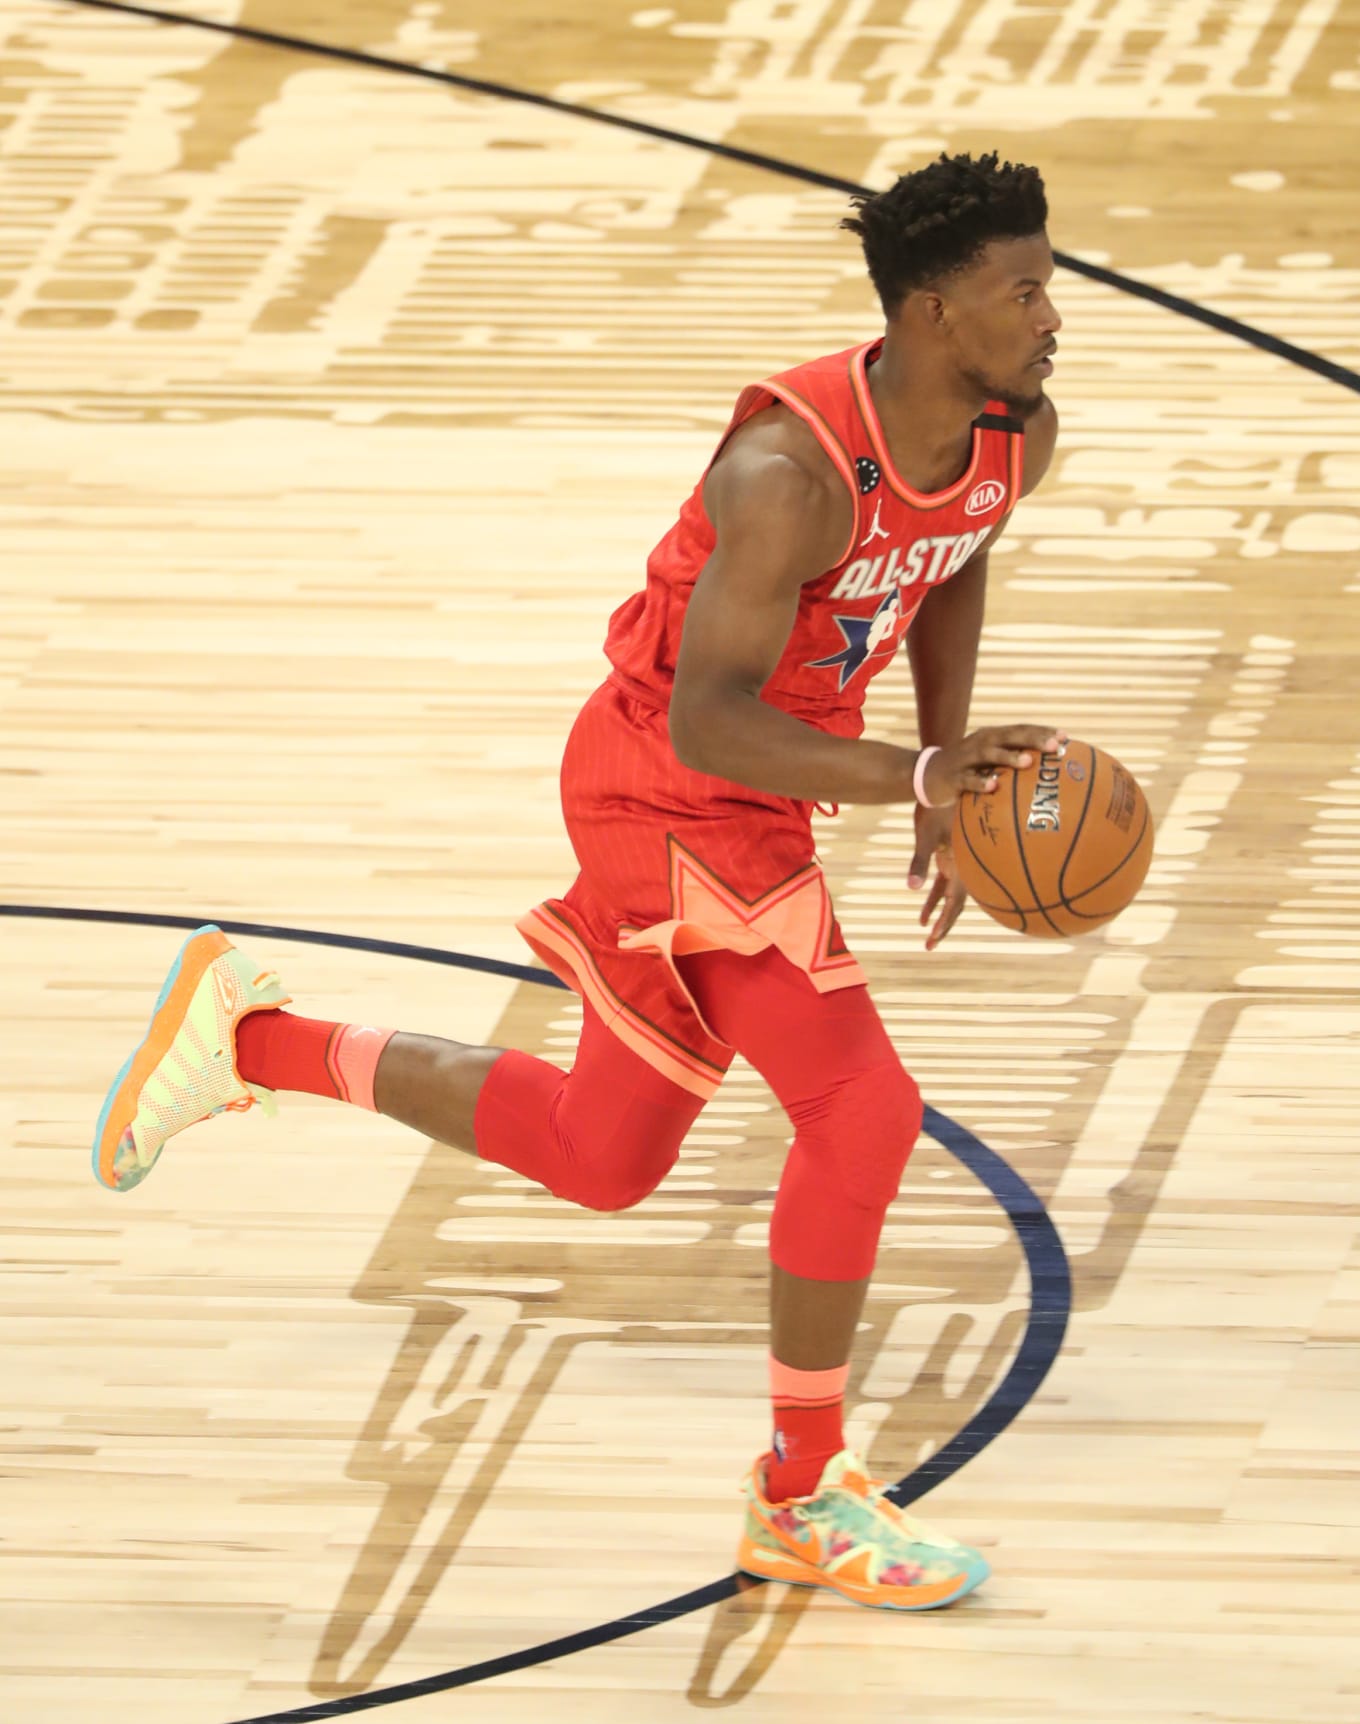 jimmy butler all star game